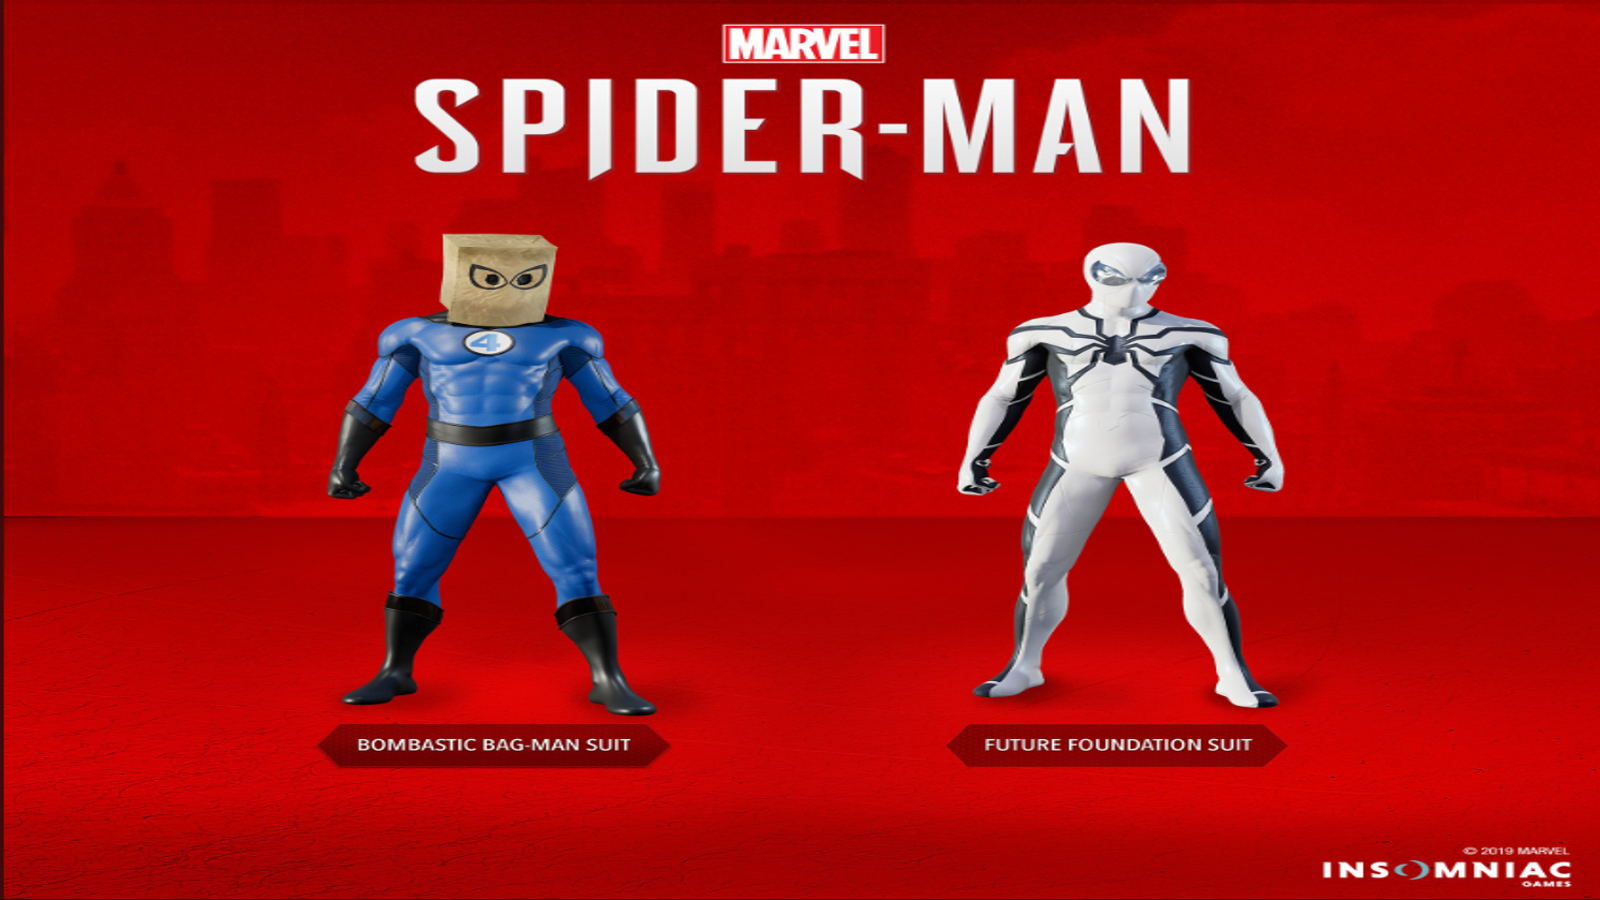 Marvel's Spider-Man gets two new Fantastic Four themed suits | VG247